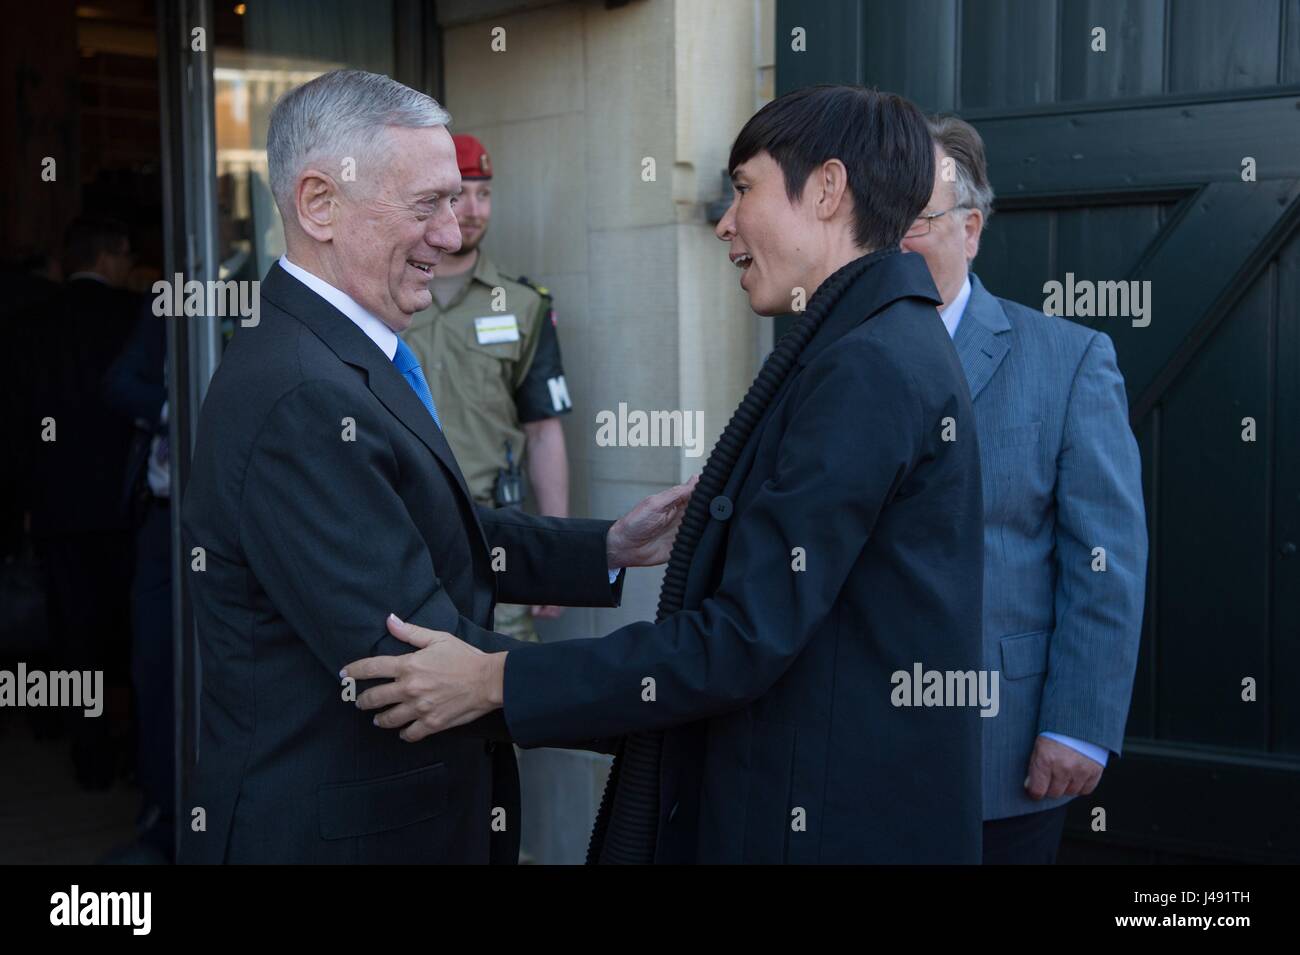 U.S. Secretary of Defense Jim Mattis, left, and Danish Minister of Defence Claus Hjort Frederiksen welcome Norwegian Defence Minister Ine Eriksen Soreide, center, for the Global Coalition on the Defeat of ISIS meeting at Eigtveds Pakhus May 9, 2017 in Copenhagen, Denmark. The meeting comes on the heals of President Donald Trump announcing that the U.S. will arm Kurdish rebels fighting in Syria. Stock Photo